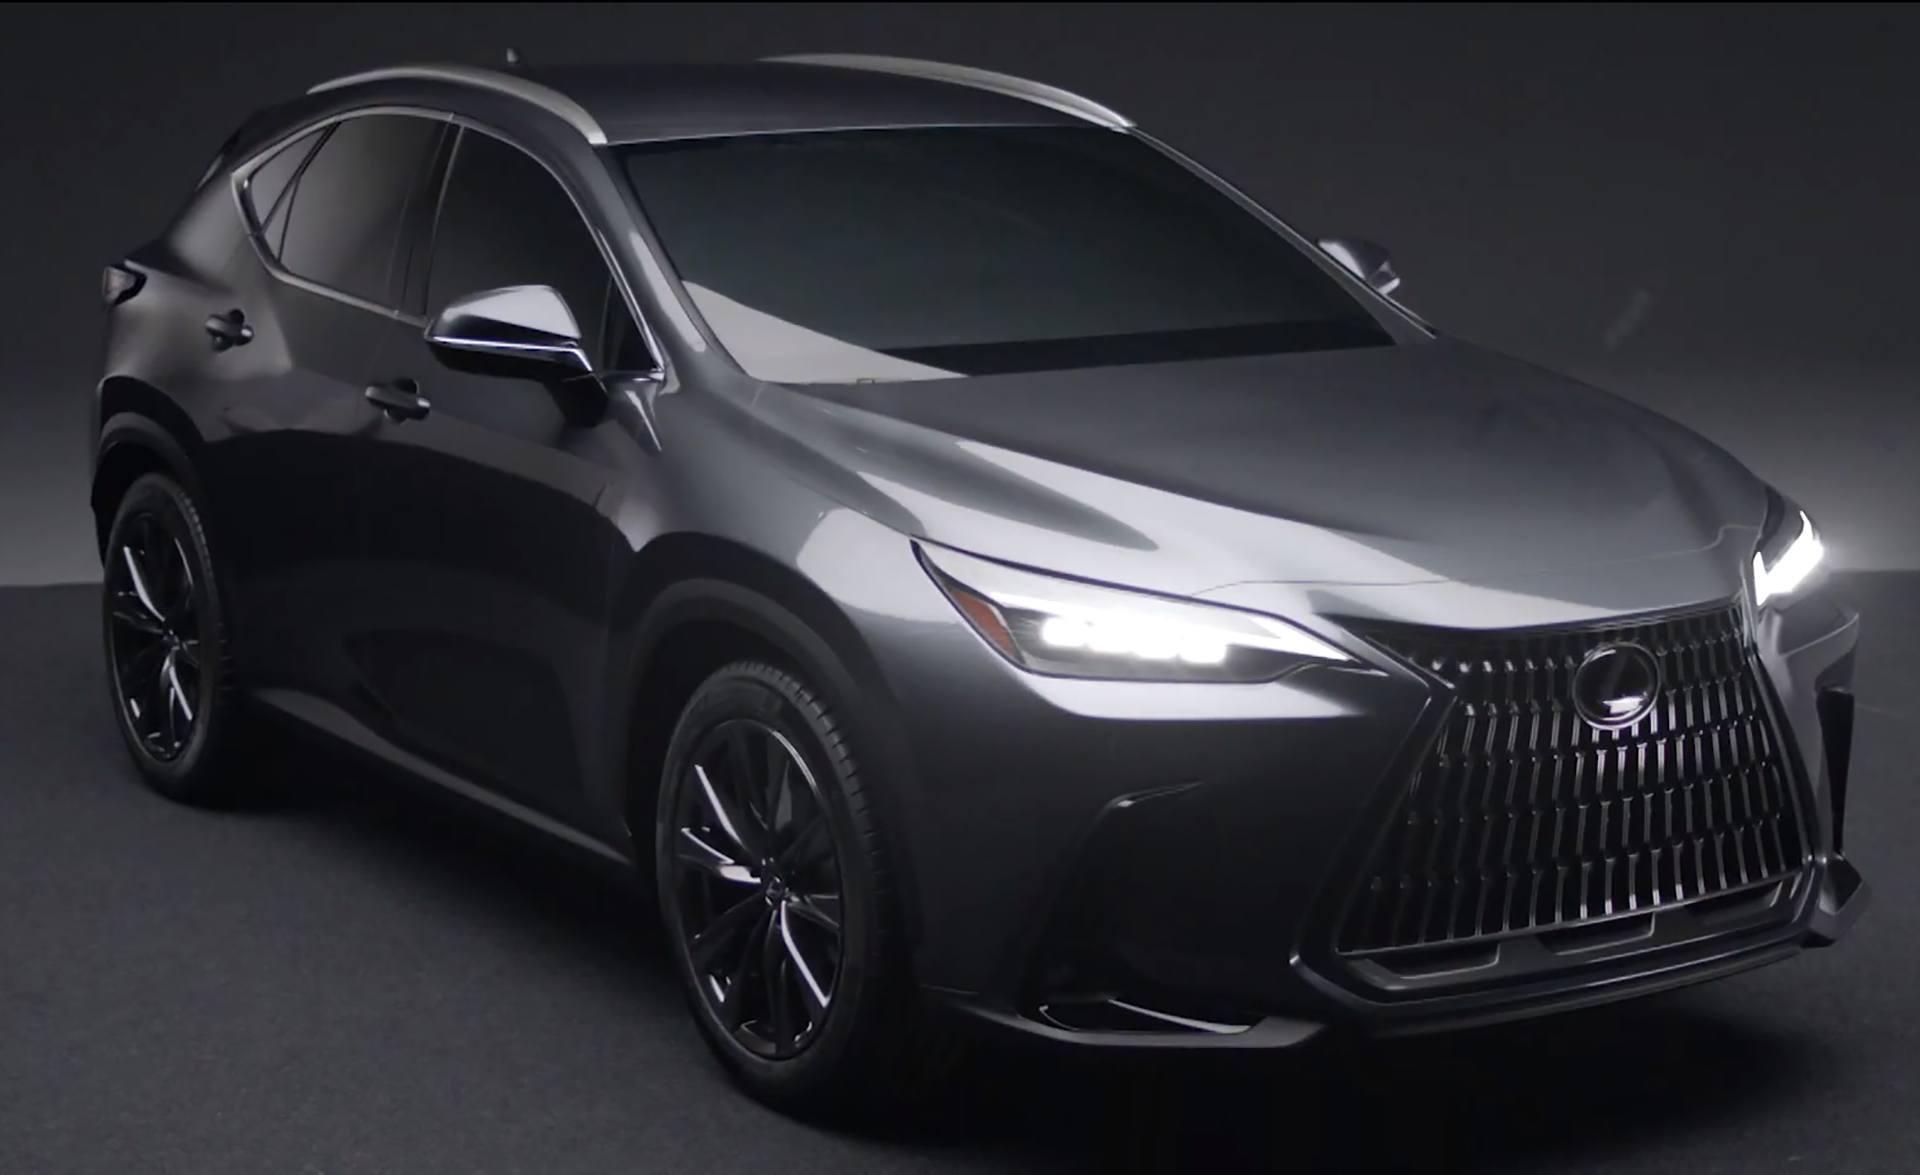 2022 Lexus NX Leaked Image Show Smoother Design, Big Touchscreen AutoGuide.com News